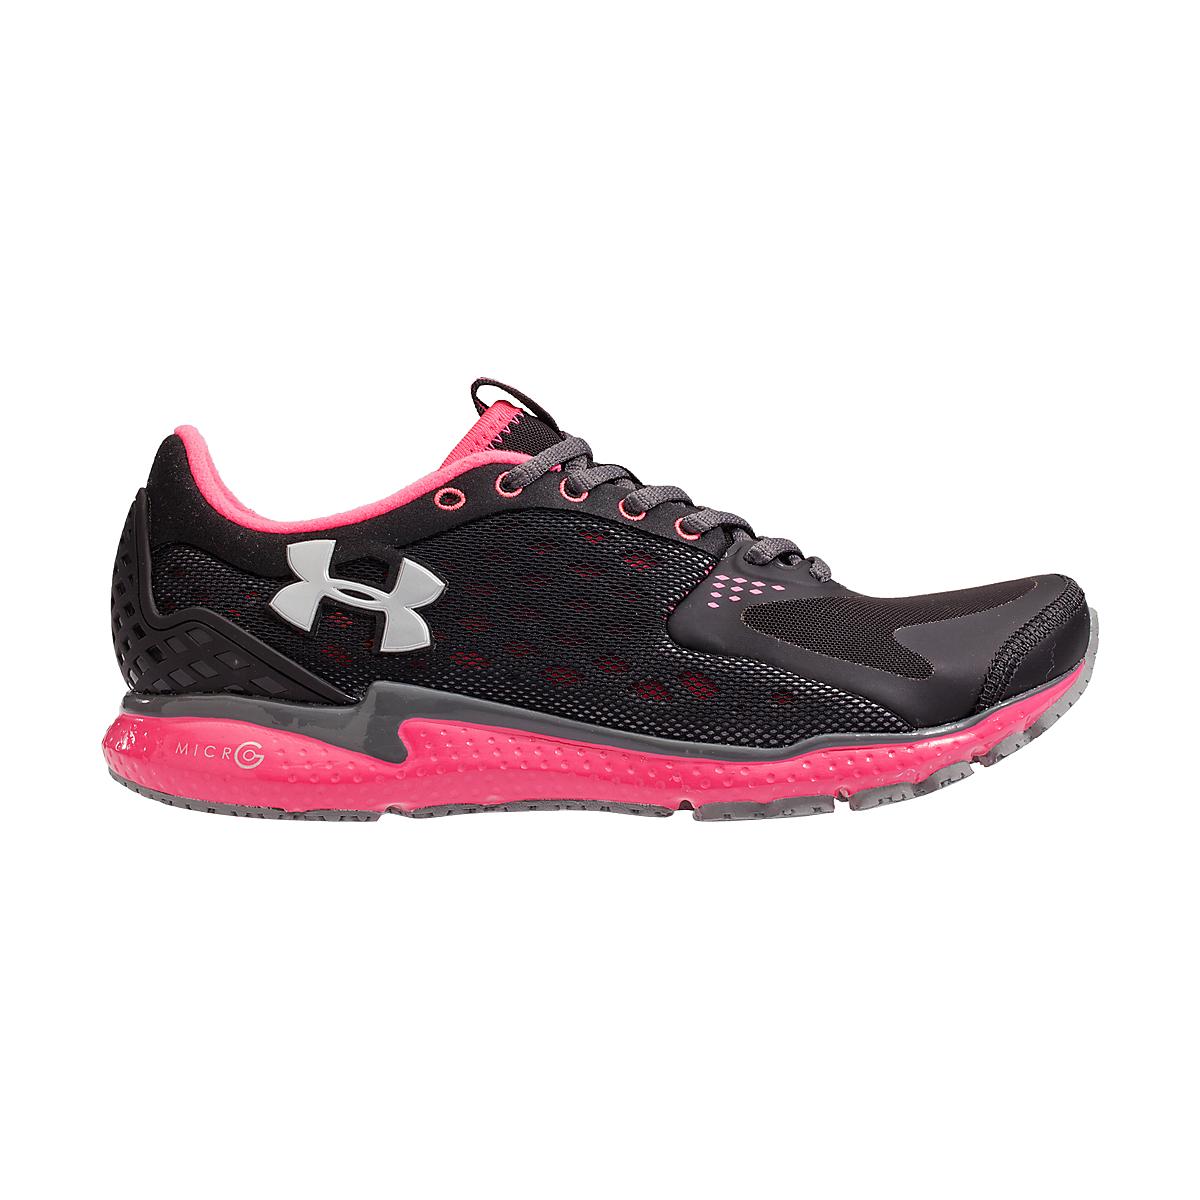 Womens Under Armour Micro G Defy Running Shoe at Road Runner Sports